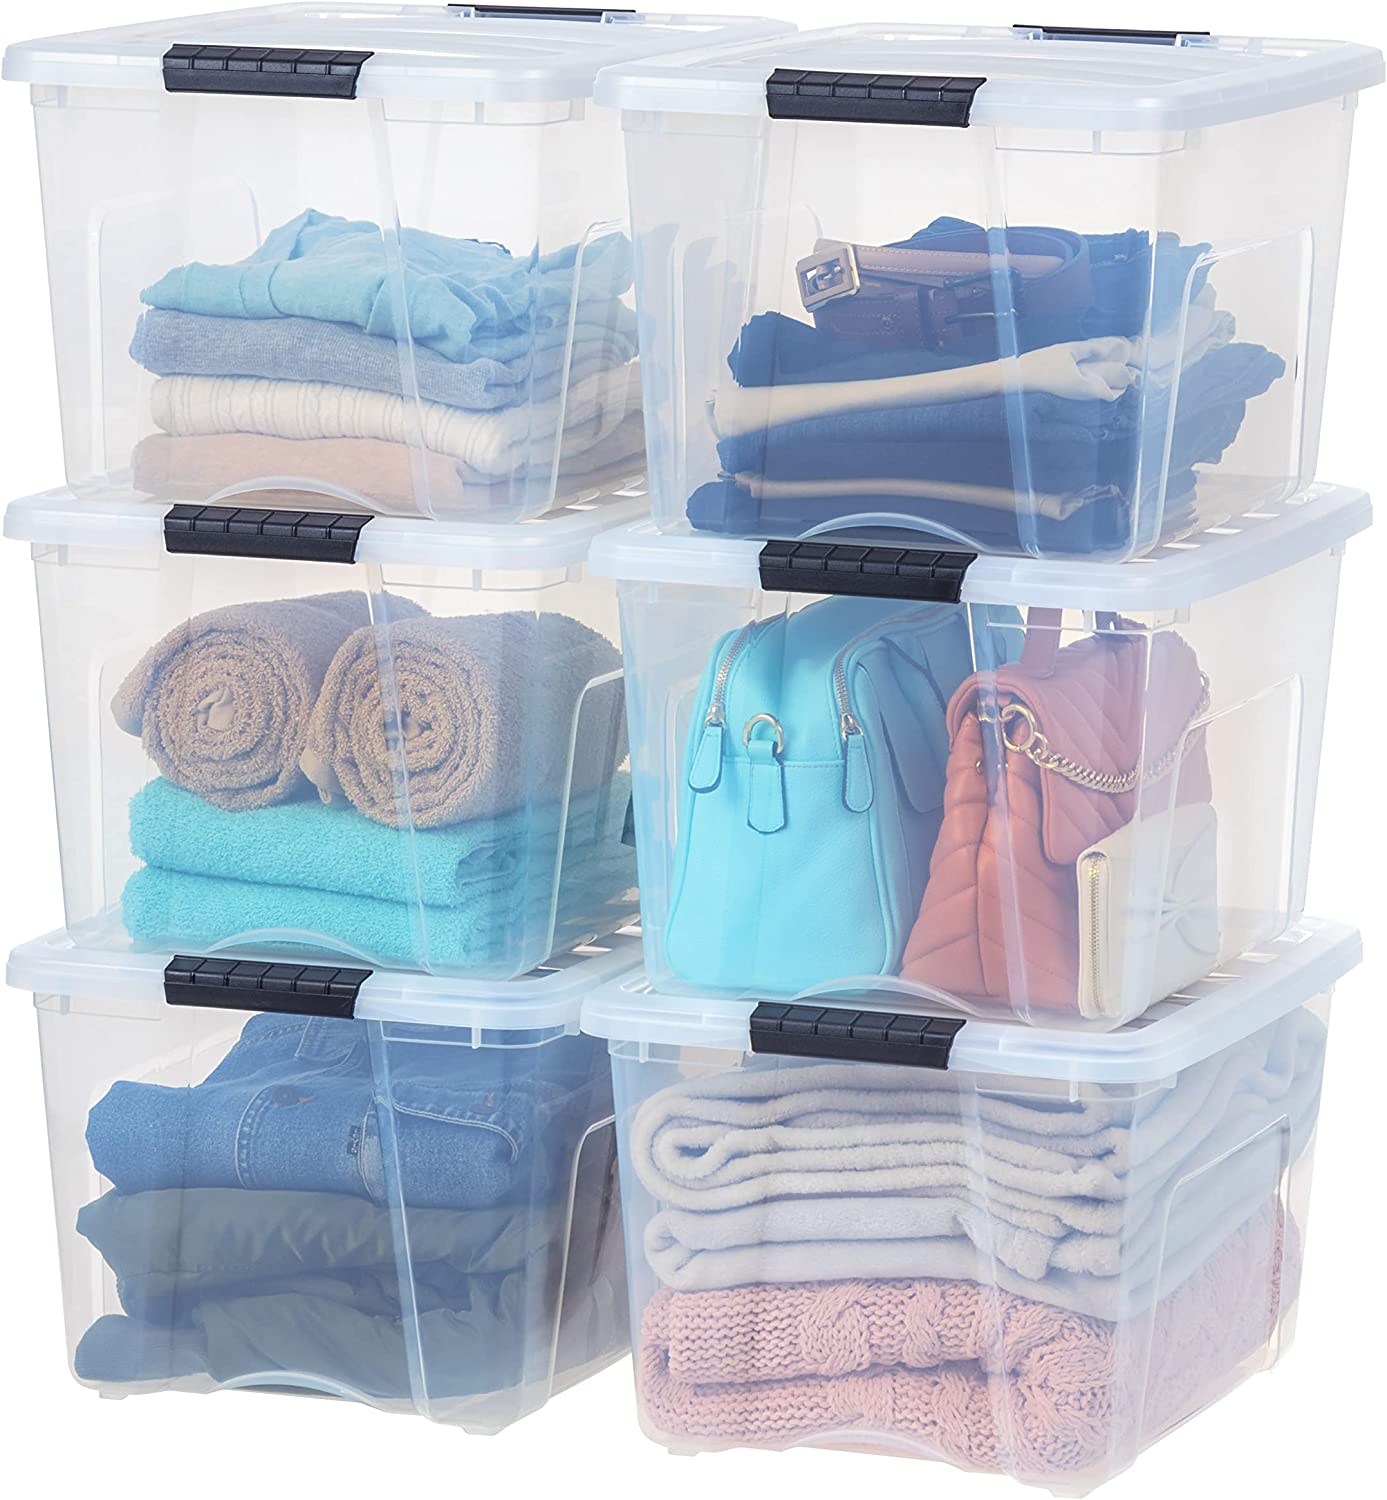 https://bigbigmart.com/wp-content/uploads/2023/06/IRIS-USA-40-Qt.-Plastic-Storage-Container-Bin-with-Secure-Lid-and-Latching-Buckles-6-pack-Clear-Durable-Stackable-Nestable-Organizing-Tote-Tub-Box-Toy-General-Organization-Medium-1.jpg